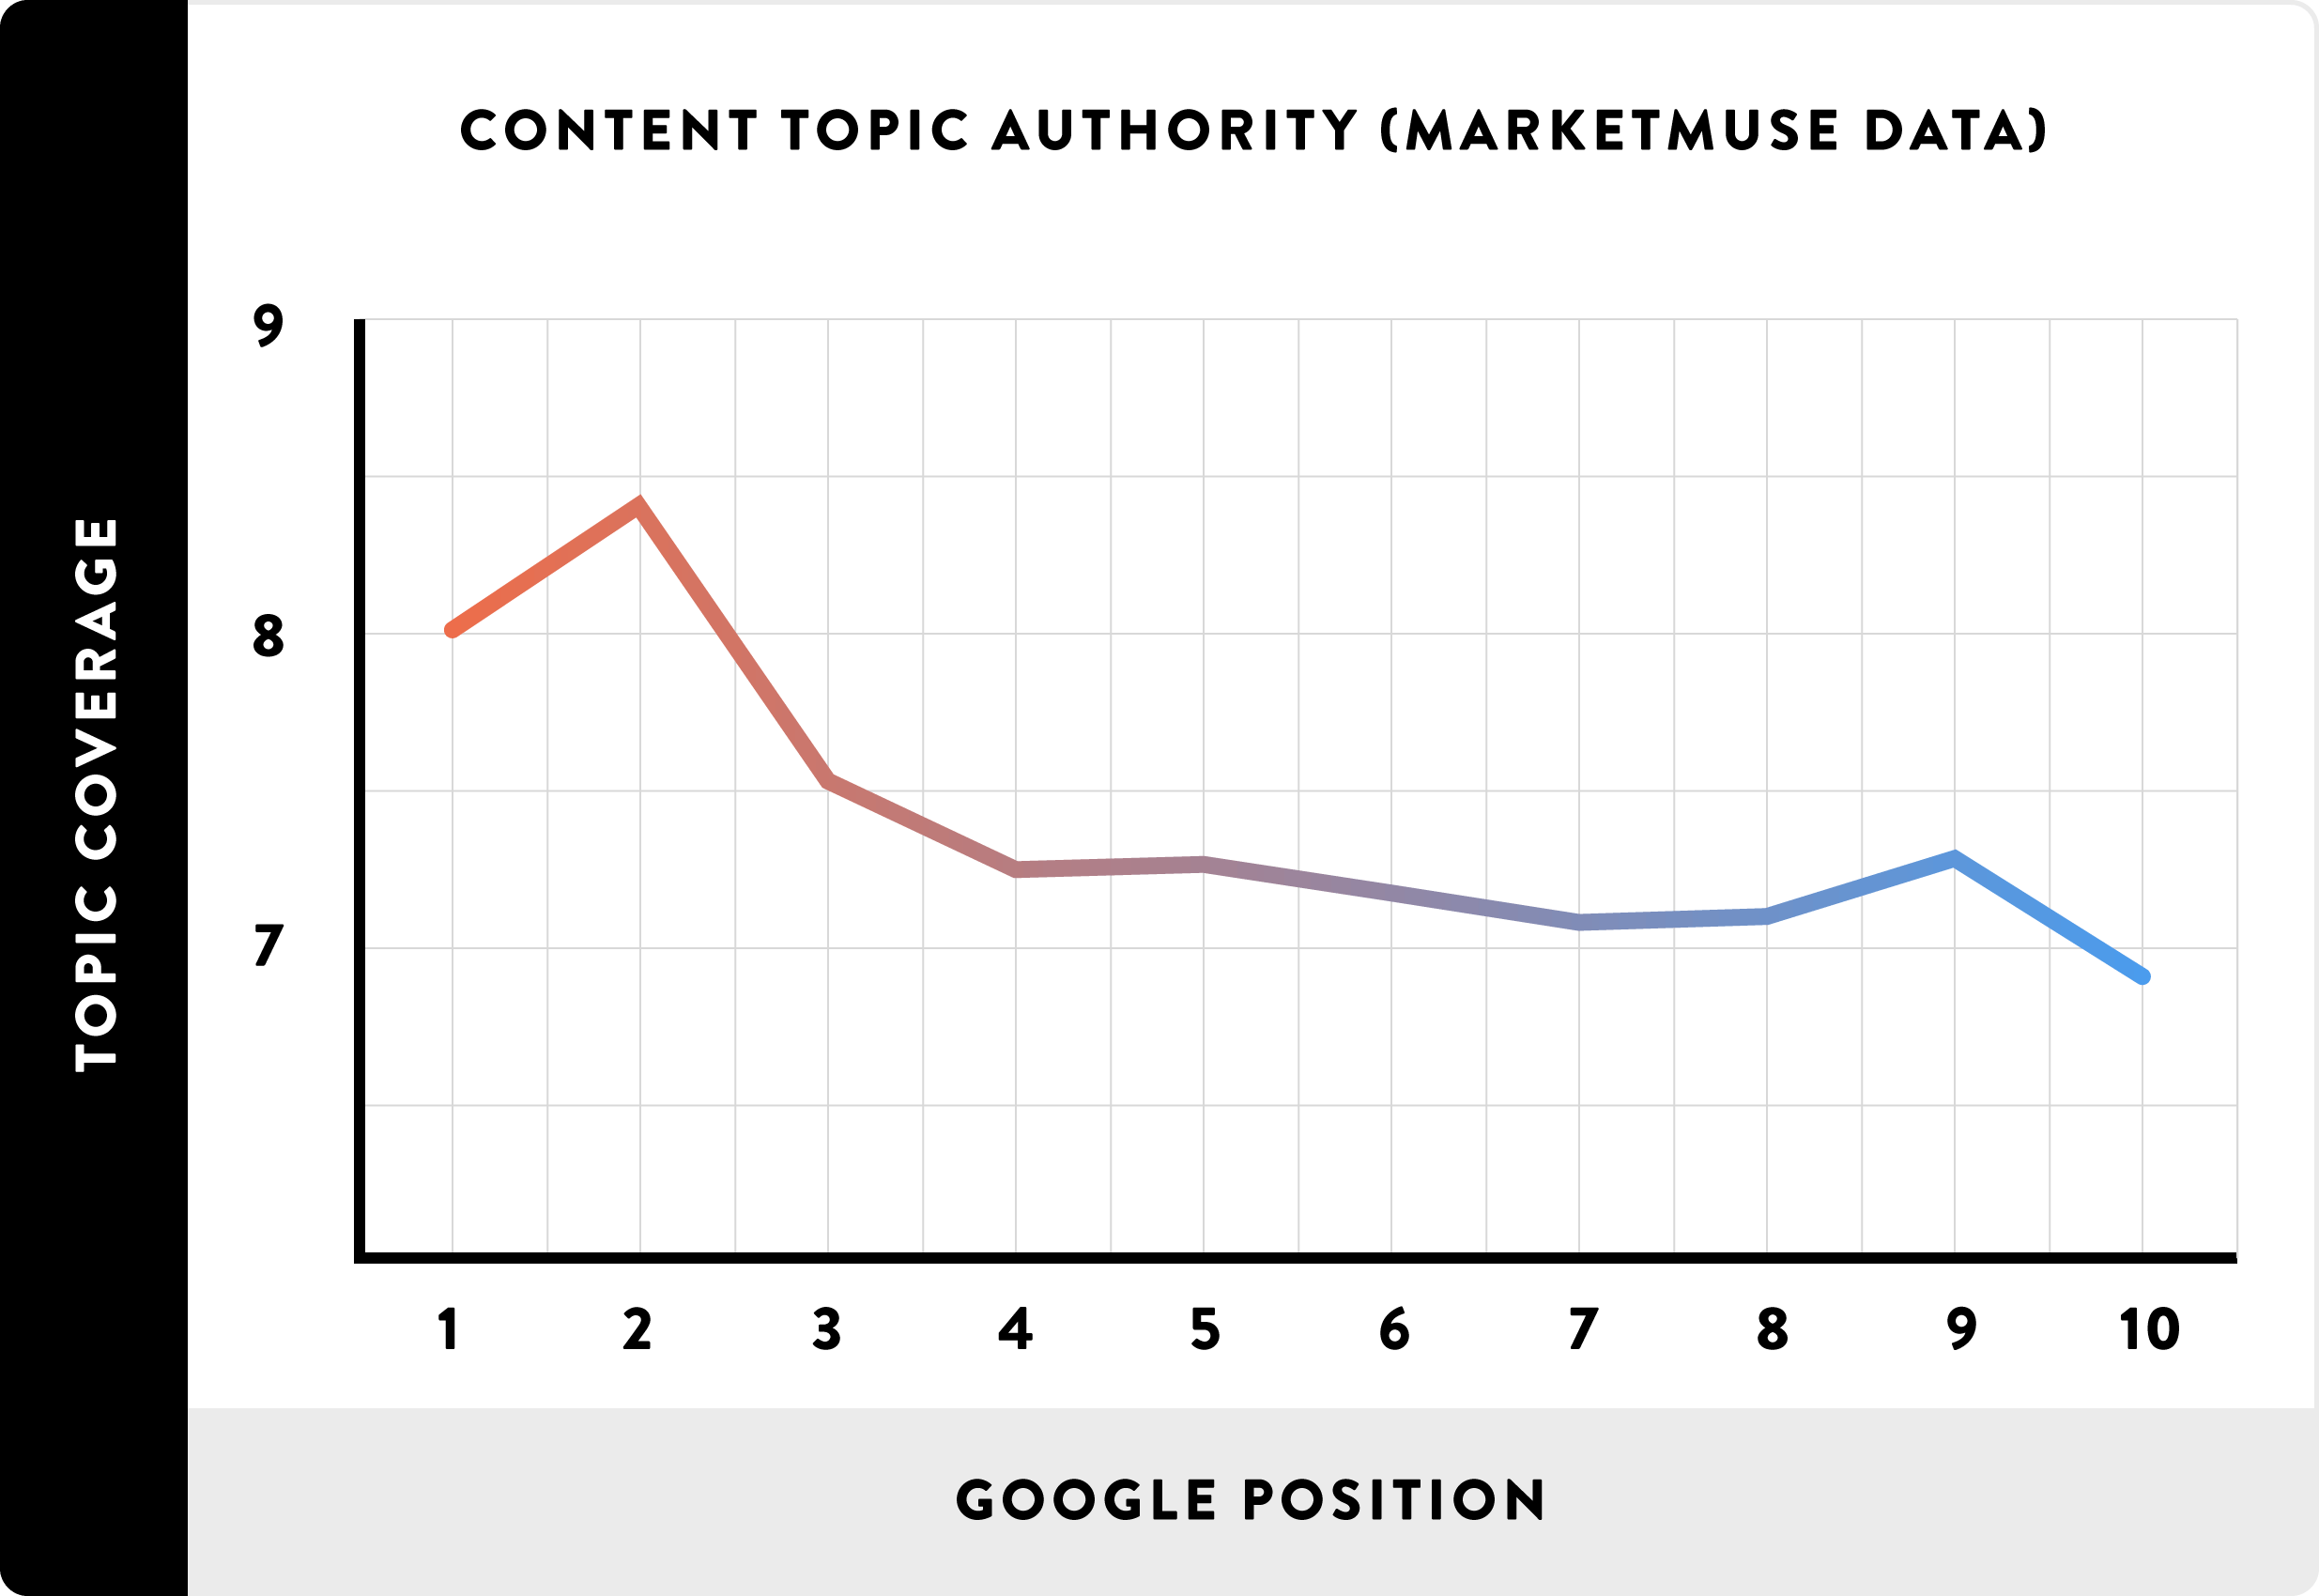 Topic authority correlated with rankings